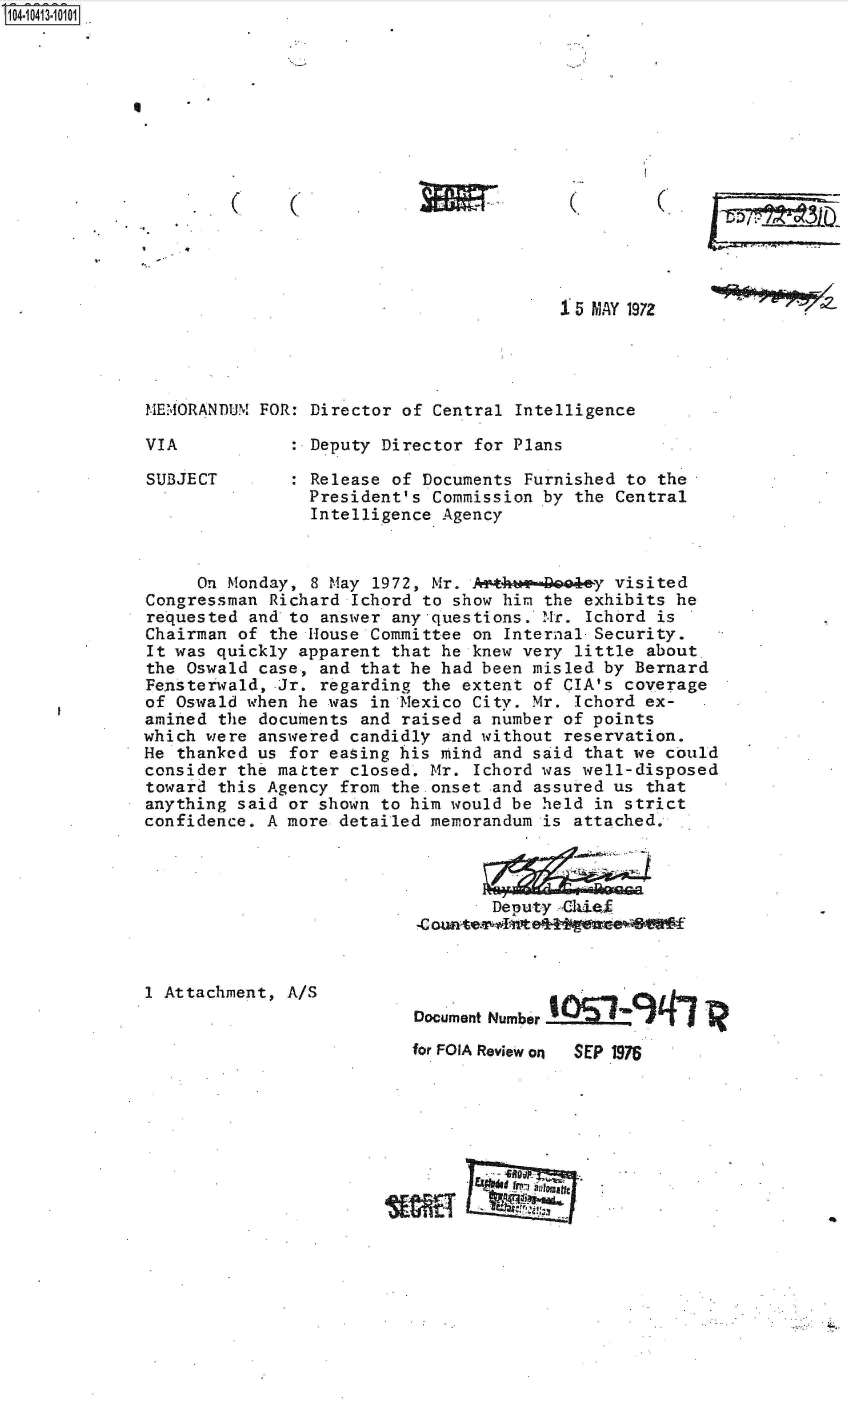 handle is hein.jfk/jfkarch48322 and id is 1 raw text is: 










C     (


(


(.


1 5 MAY 197Z


IEMORANDUM FOR: Director  of Central Intelligence

VIA              Deputy Director for Plans


SUBJECT


Release of Documents Furnished  to the
President's Commission by  the Central
Intelligence Agency


     On Monday,  8 May 1972, Mr. Arthee-Bode-y visited
Congressman  Richard Ichord to show him the exhibits he
requested  and to answer any questions. Mr. Ichord is
Chairman of  the House Committee on Internal-Security.
It was quickly  apparent that he knew very little about
the Oswald  case, and that he had been misled by Bernard
Fensterwald, Jr.  regarding the extent of CIA's coverage
of Oswald when he was  in Mexico City. Mr. Ichord ex-
amined the  documents and raised a number of points
which were answered  candidly and without reservation.
He thanked us  for easing his mind and said that we could
consider the matter  closed. Mr. Ichord was well-disposed
toward this Agency  from the onset and assured us that
anything said  or shown to him would be held in strict
confidence. A more  detailed memorandum is attached.




                                   Deputy cZhiefi
                           .C oute~I'~tek vr*


1 Attachment, A/S


Document Number


for FOIA Review on


SEP 1976


fray


S1O4~iO413~1O1O1


I


IEW


